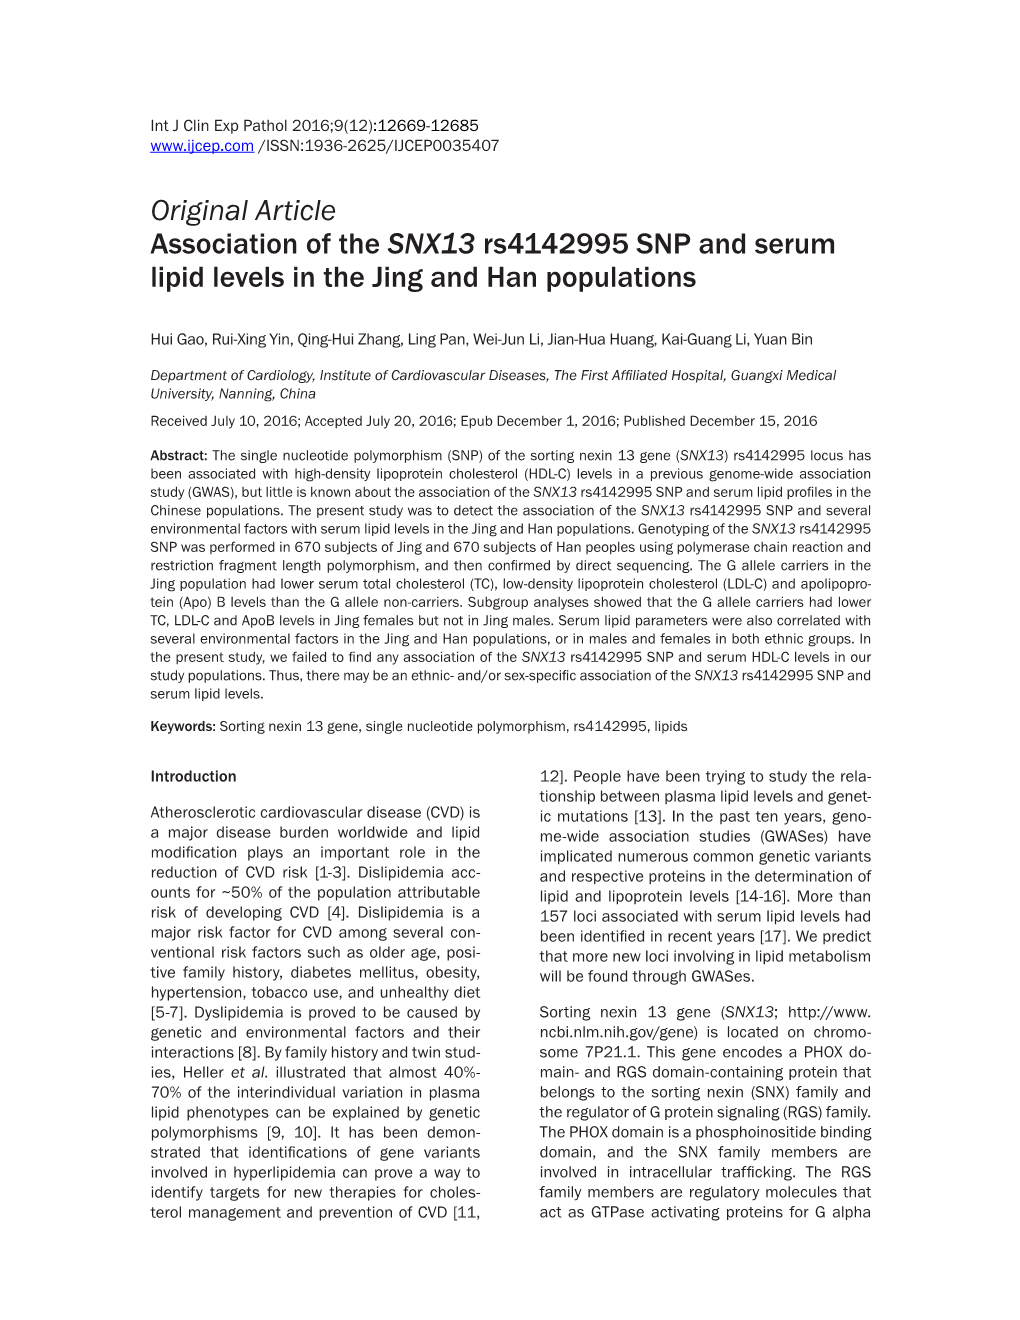 Original Article Association of the SNX13 Rs4142995 SNP and Serum Lipid Levels in the Jing and Han Populations